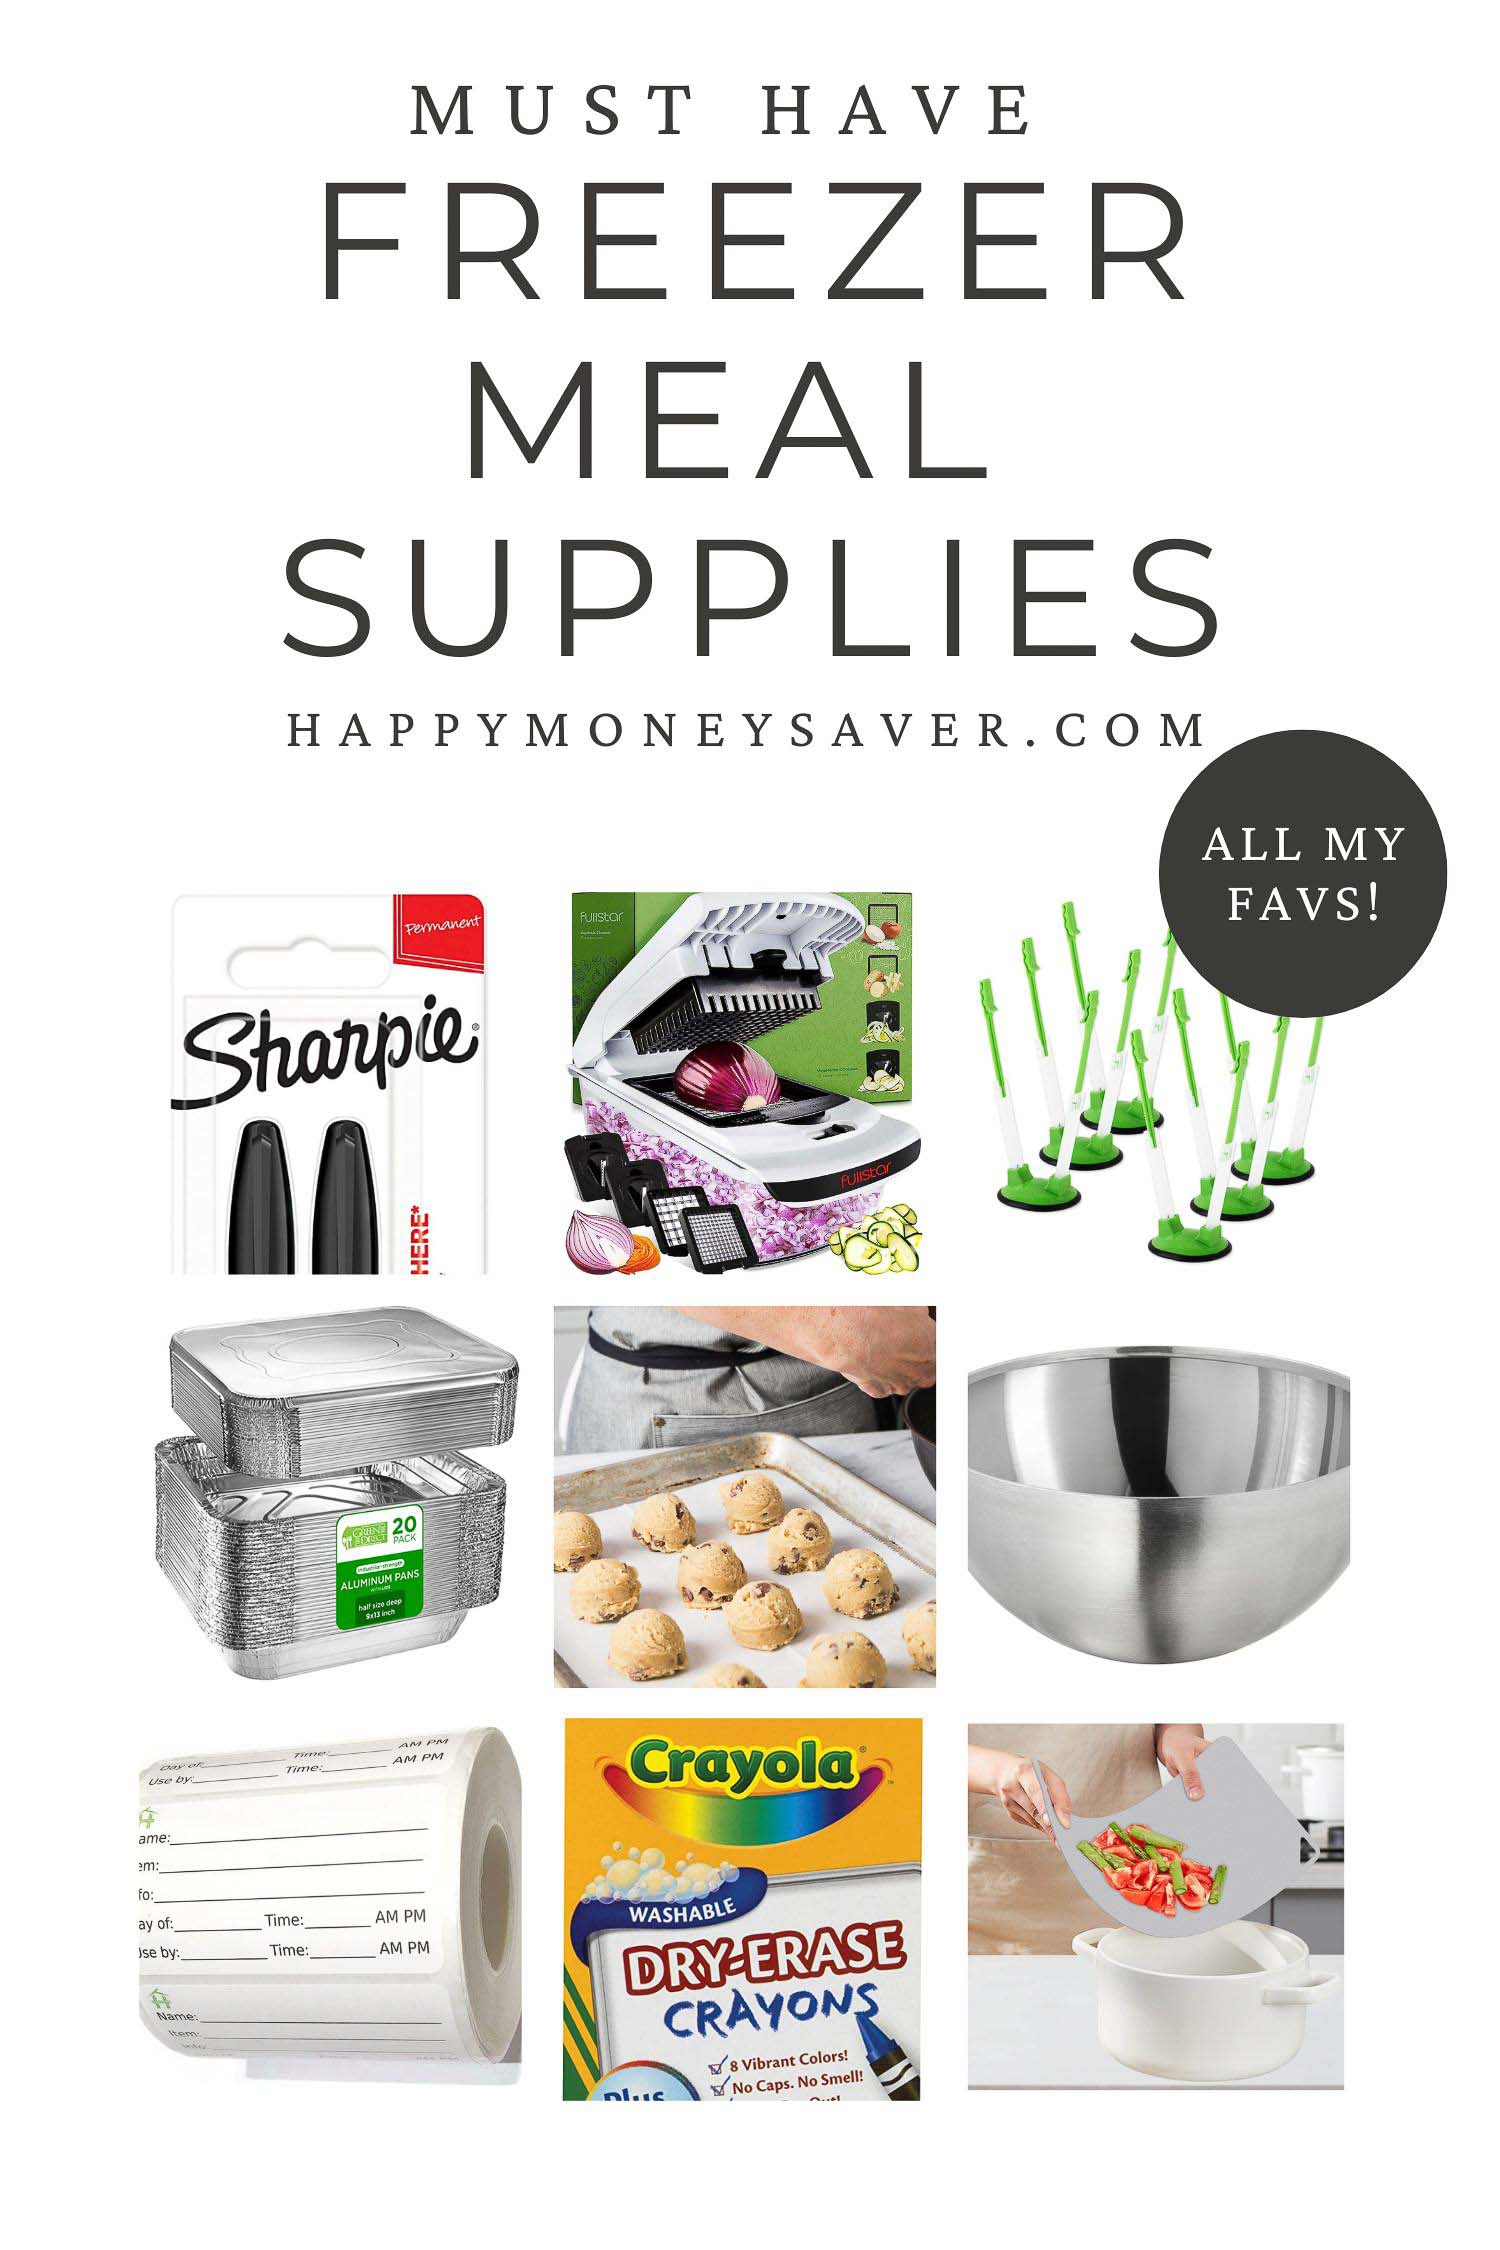 must have freezer meal supplies words and happymoneysaver.com and all my favs in a black bubble. 9 squares with products inside each such as sharpie markers, veggie choppers and more.